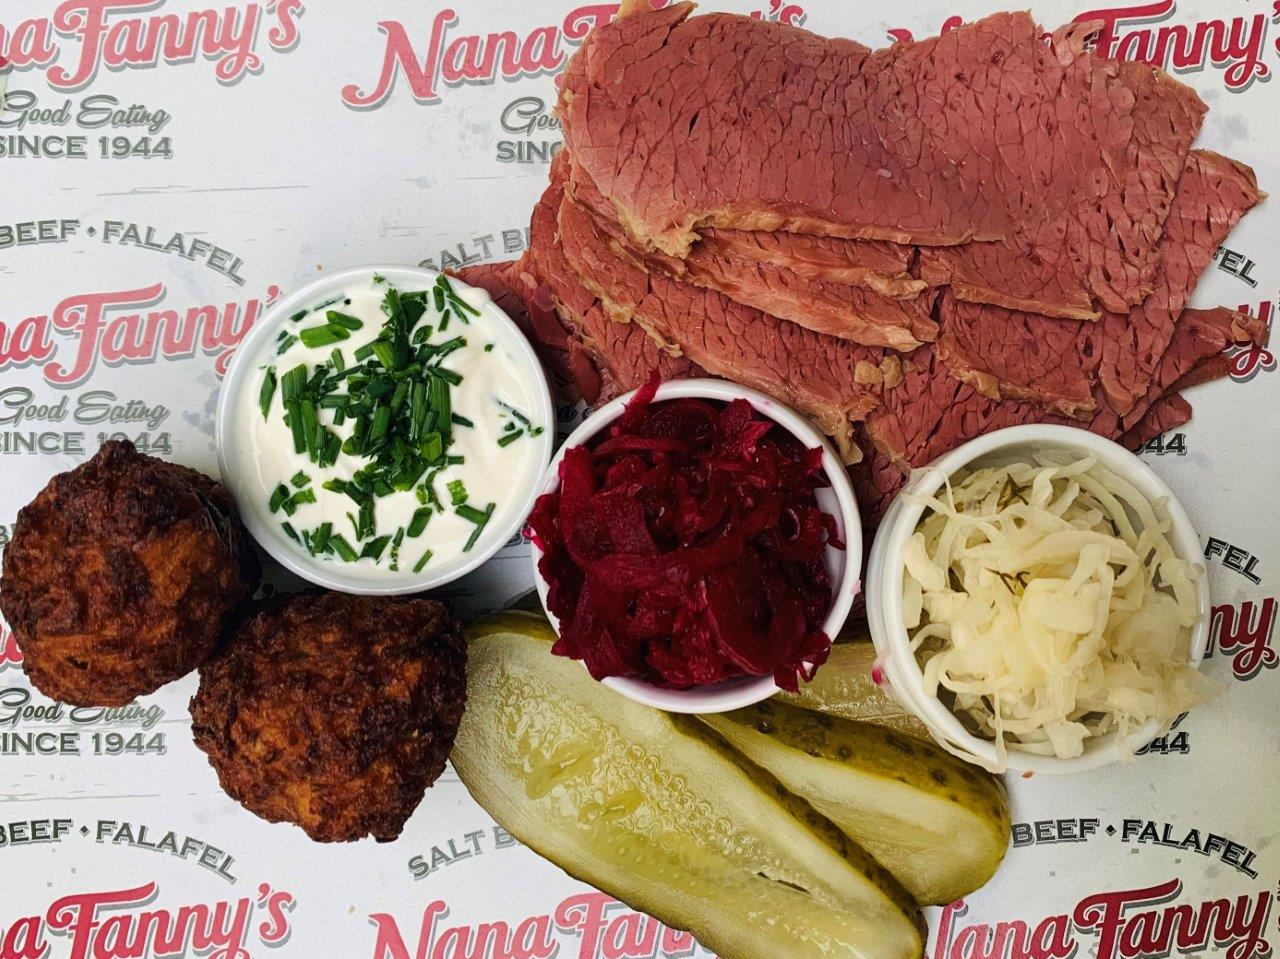 image shows: Now that is Nana Fannys salt beef